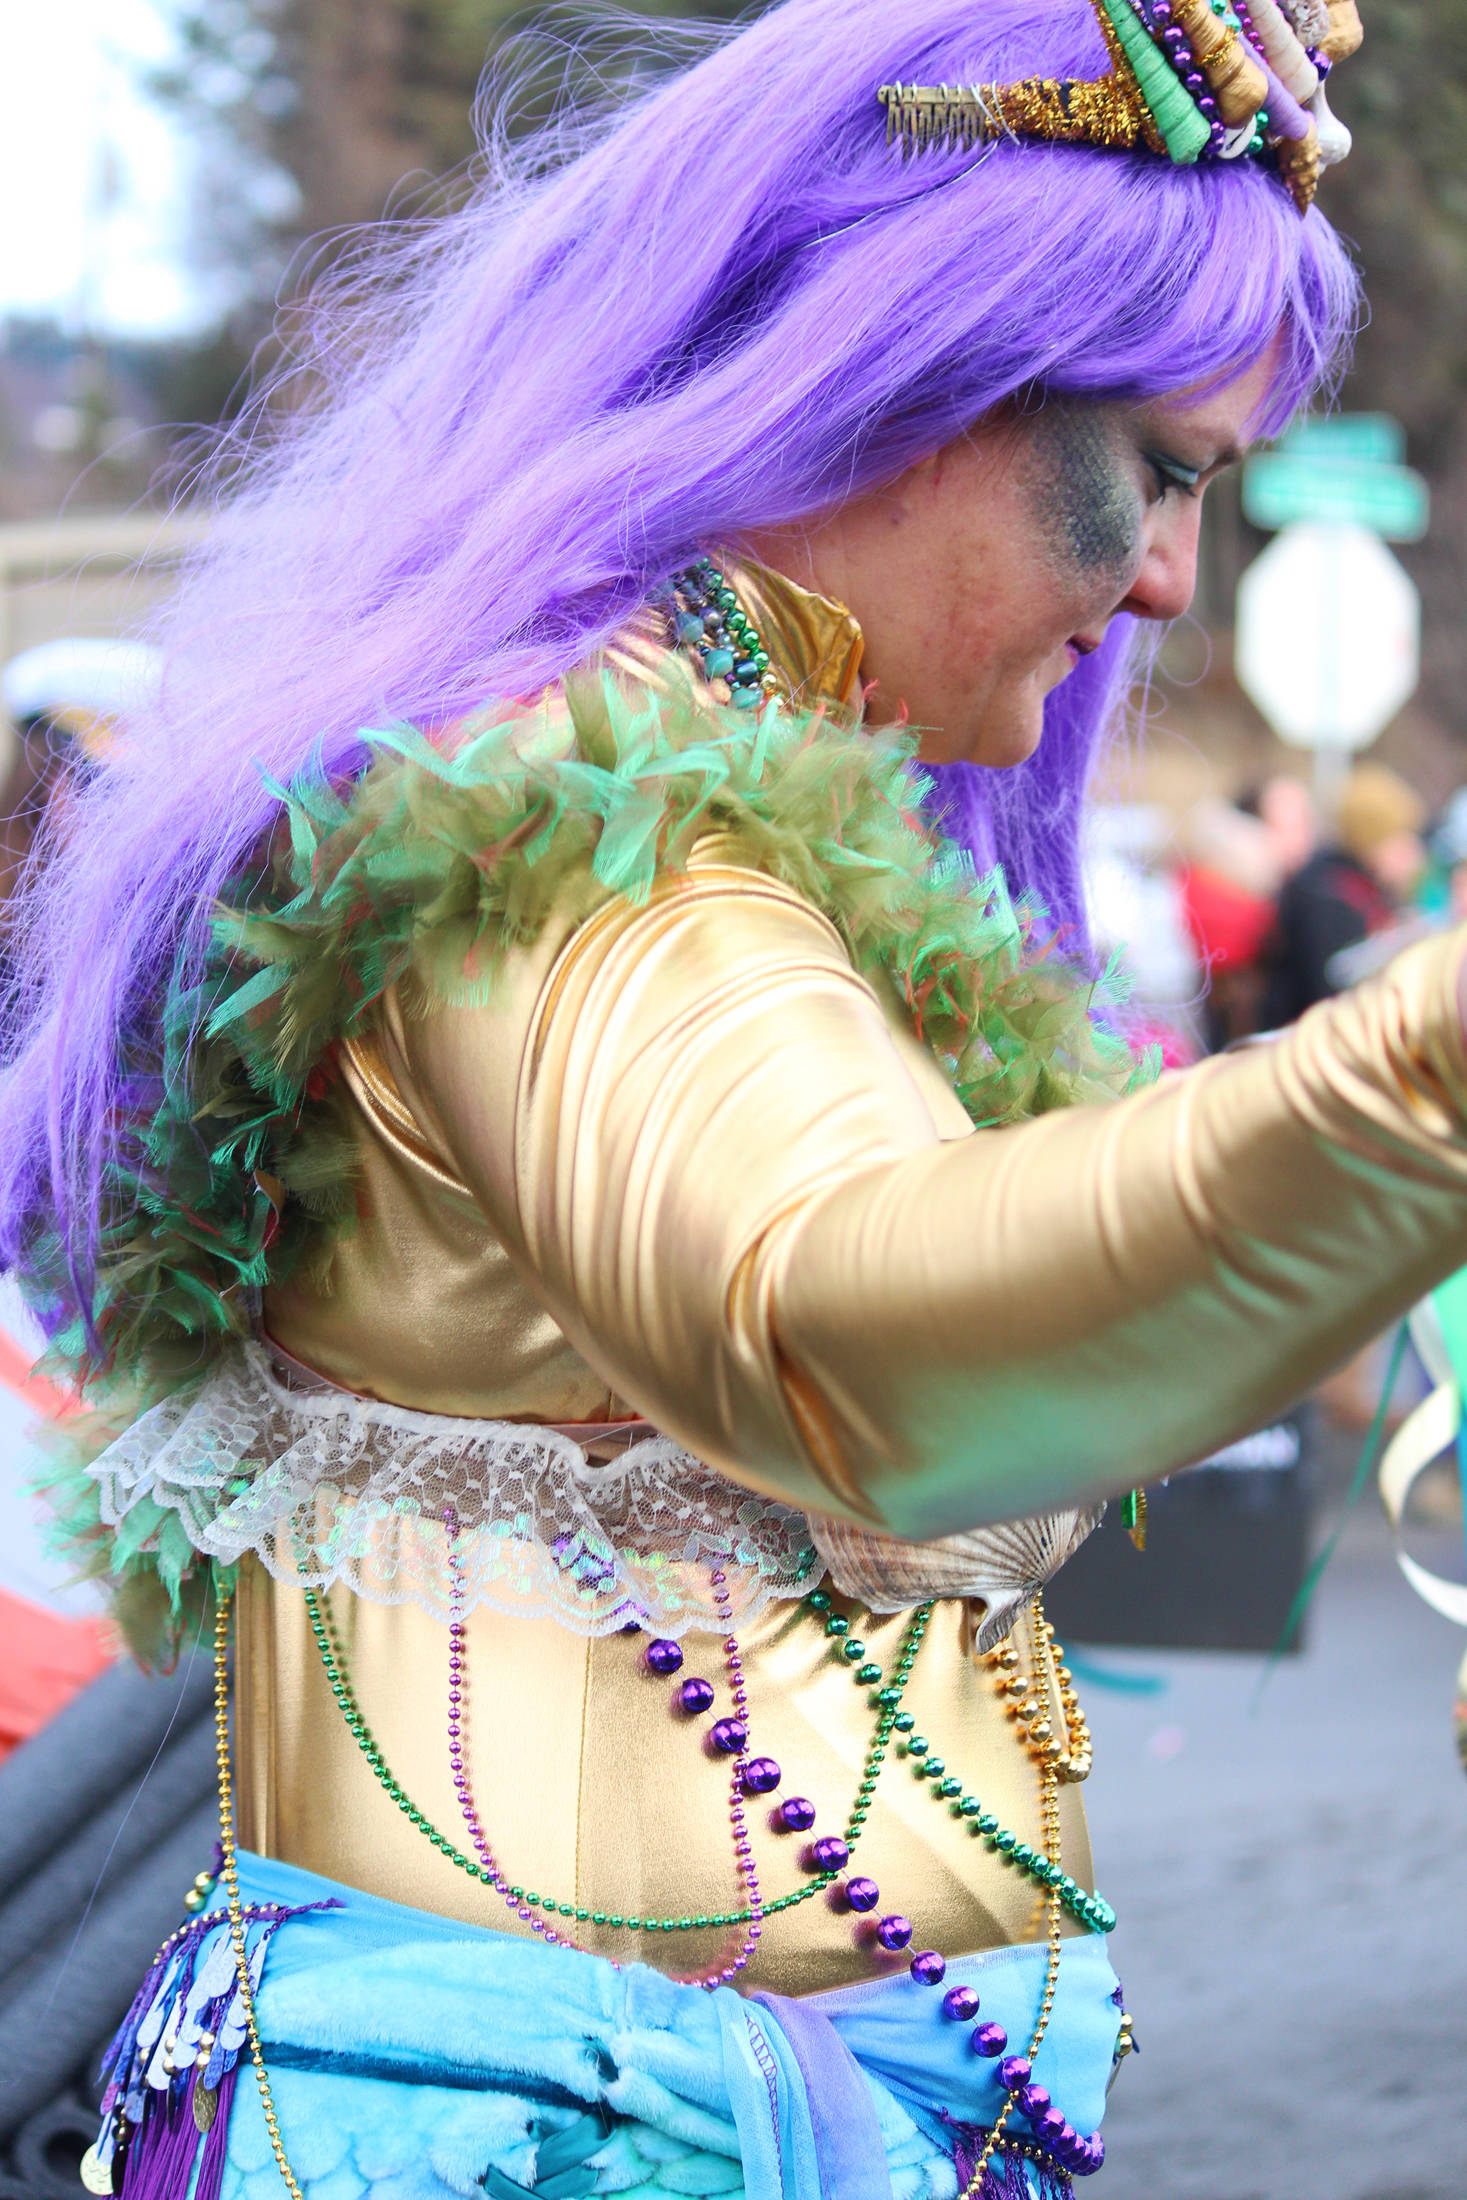 A woman dressed as a mermaid marches down Pioneer Avenue with the Krewe of Gambrinus on Saturday, Feb. 9, 2019 at the Winter Carnival Parade in Homer, Alaska. (Photo by Megan Pacer/Homer News)